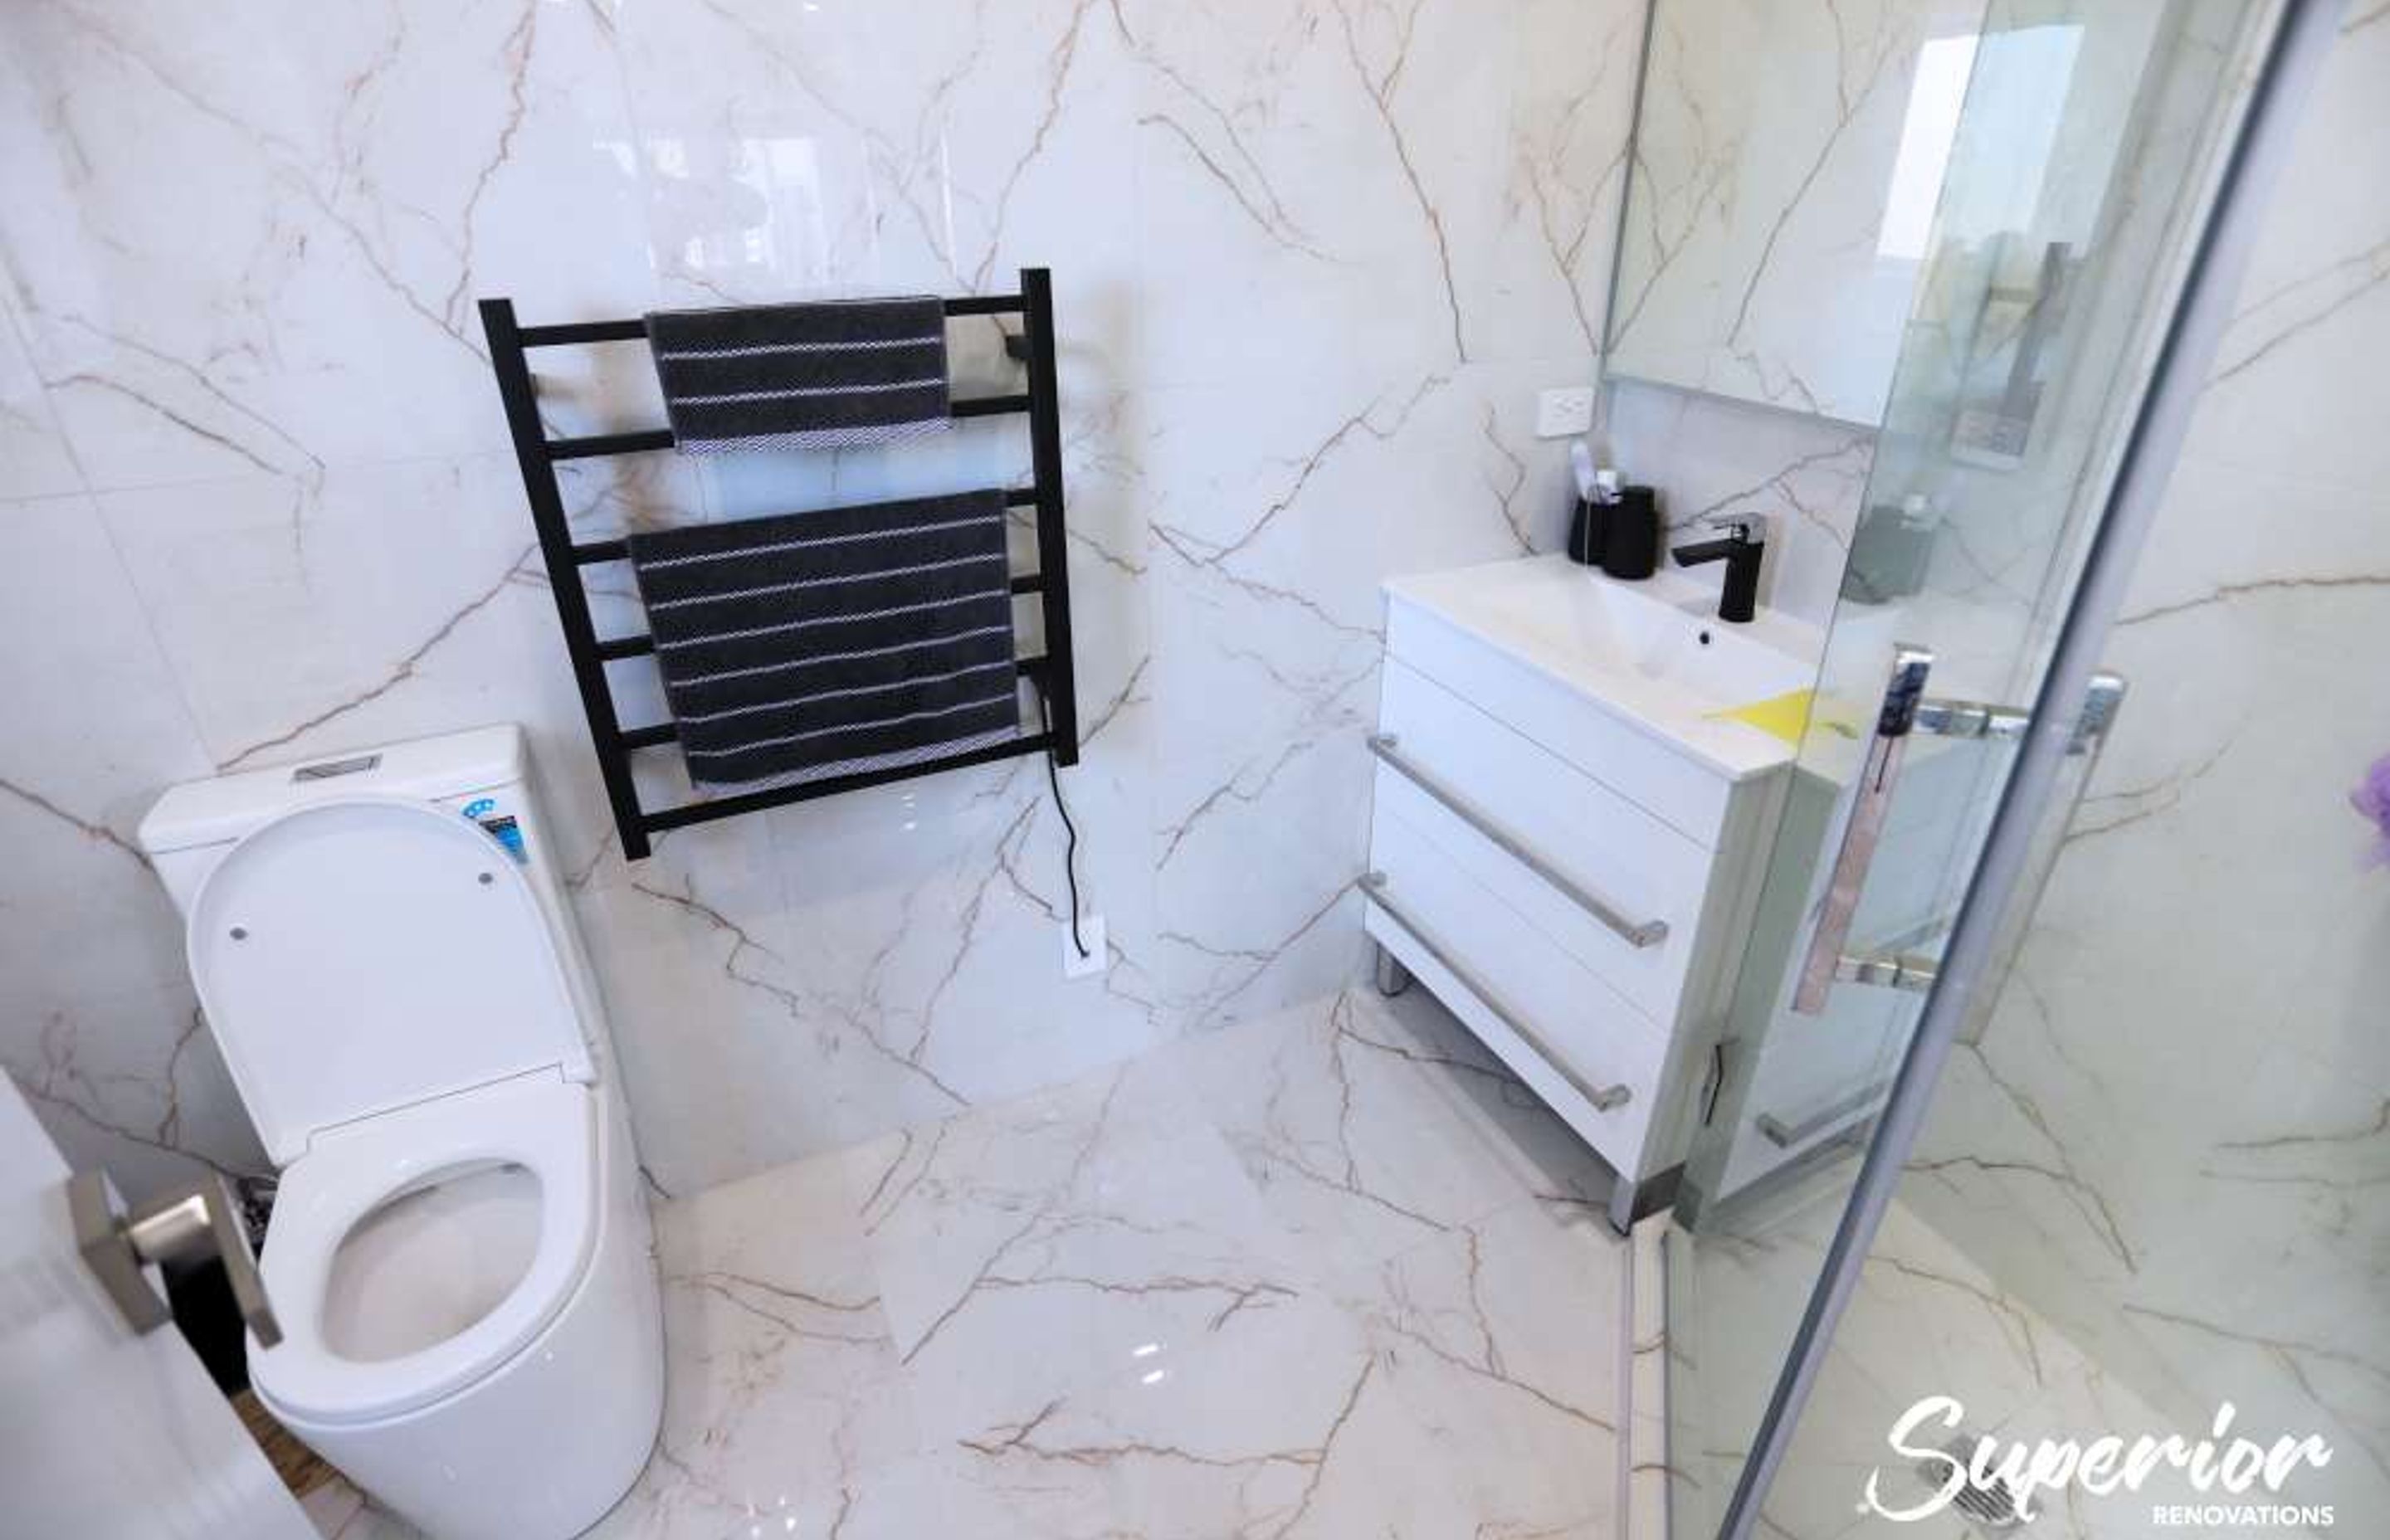 This was a very small awkward place but our clients wanted to make this a guest ensuite. We used the corner L shaped area to make a tiled glass door shower. The same times were used on the walls and floors to give an illusion of space – Bathroom renovatio